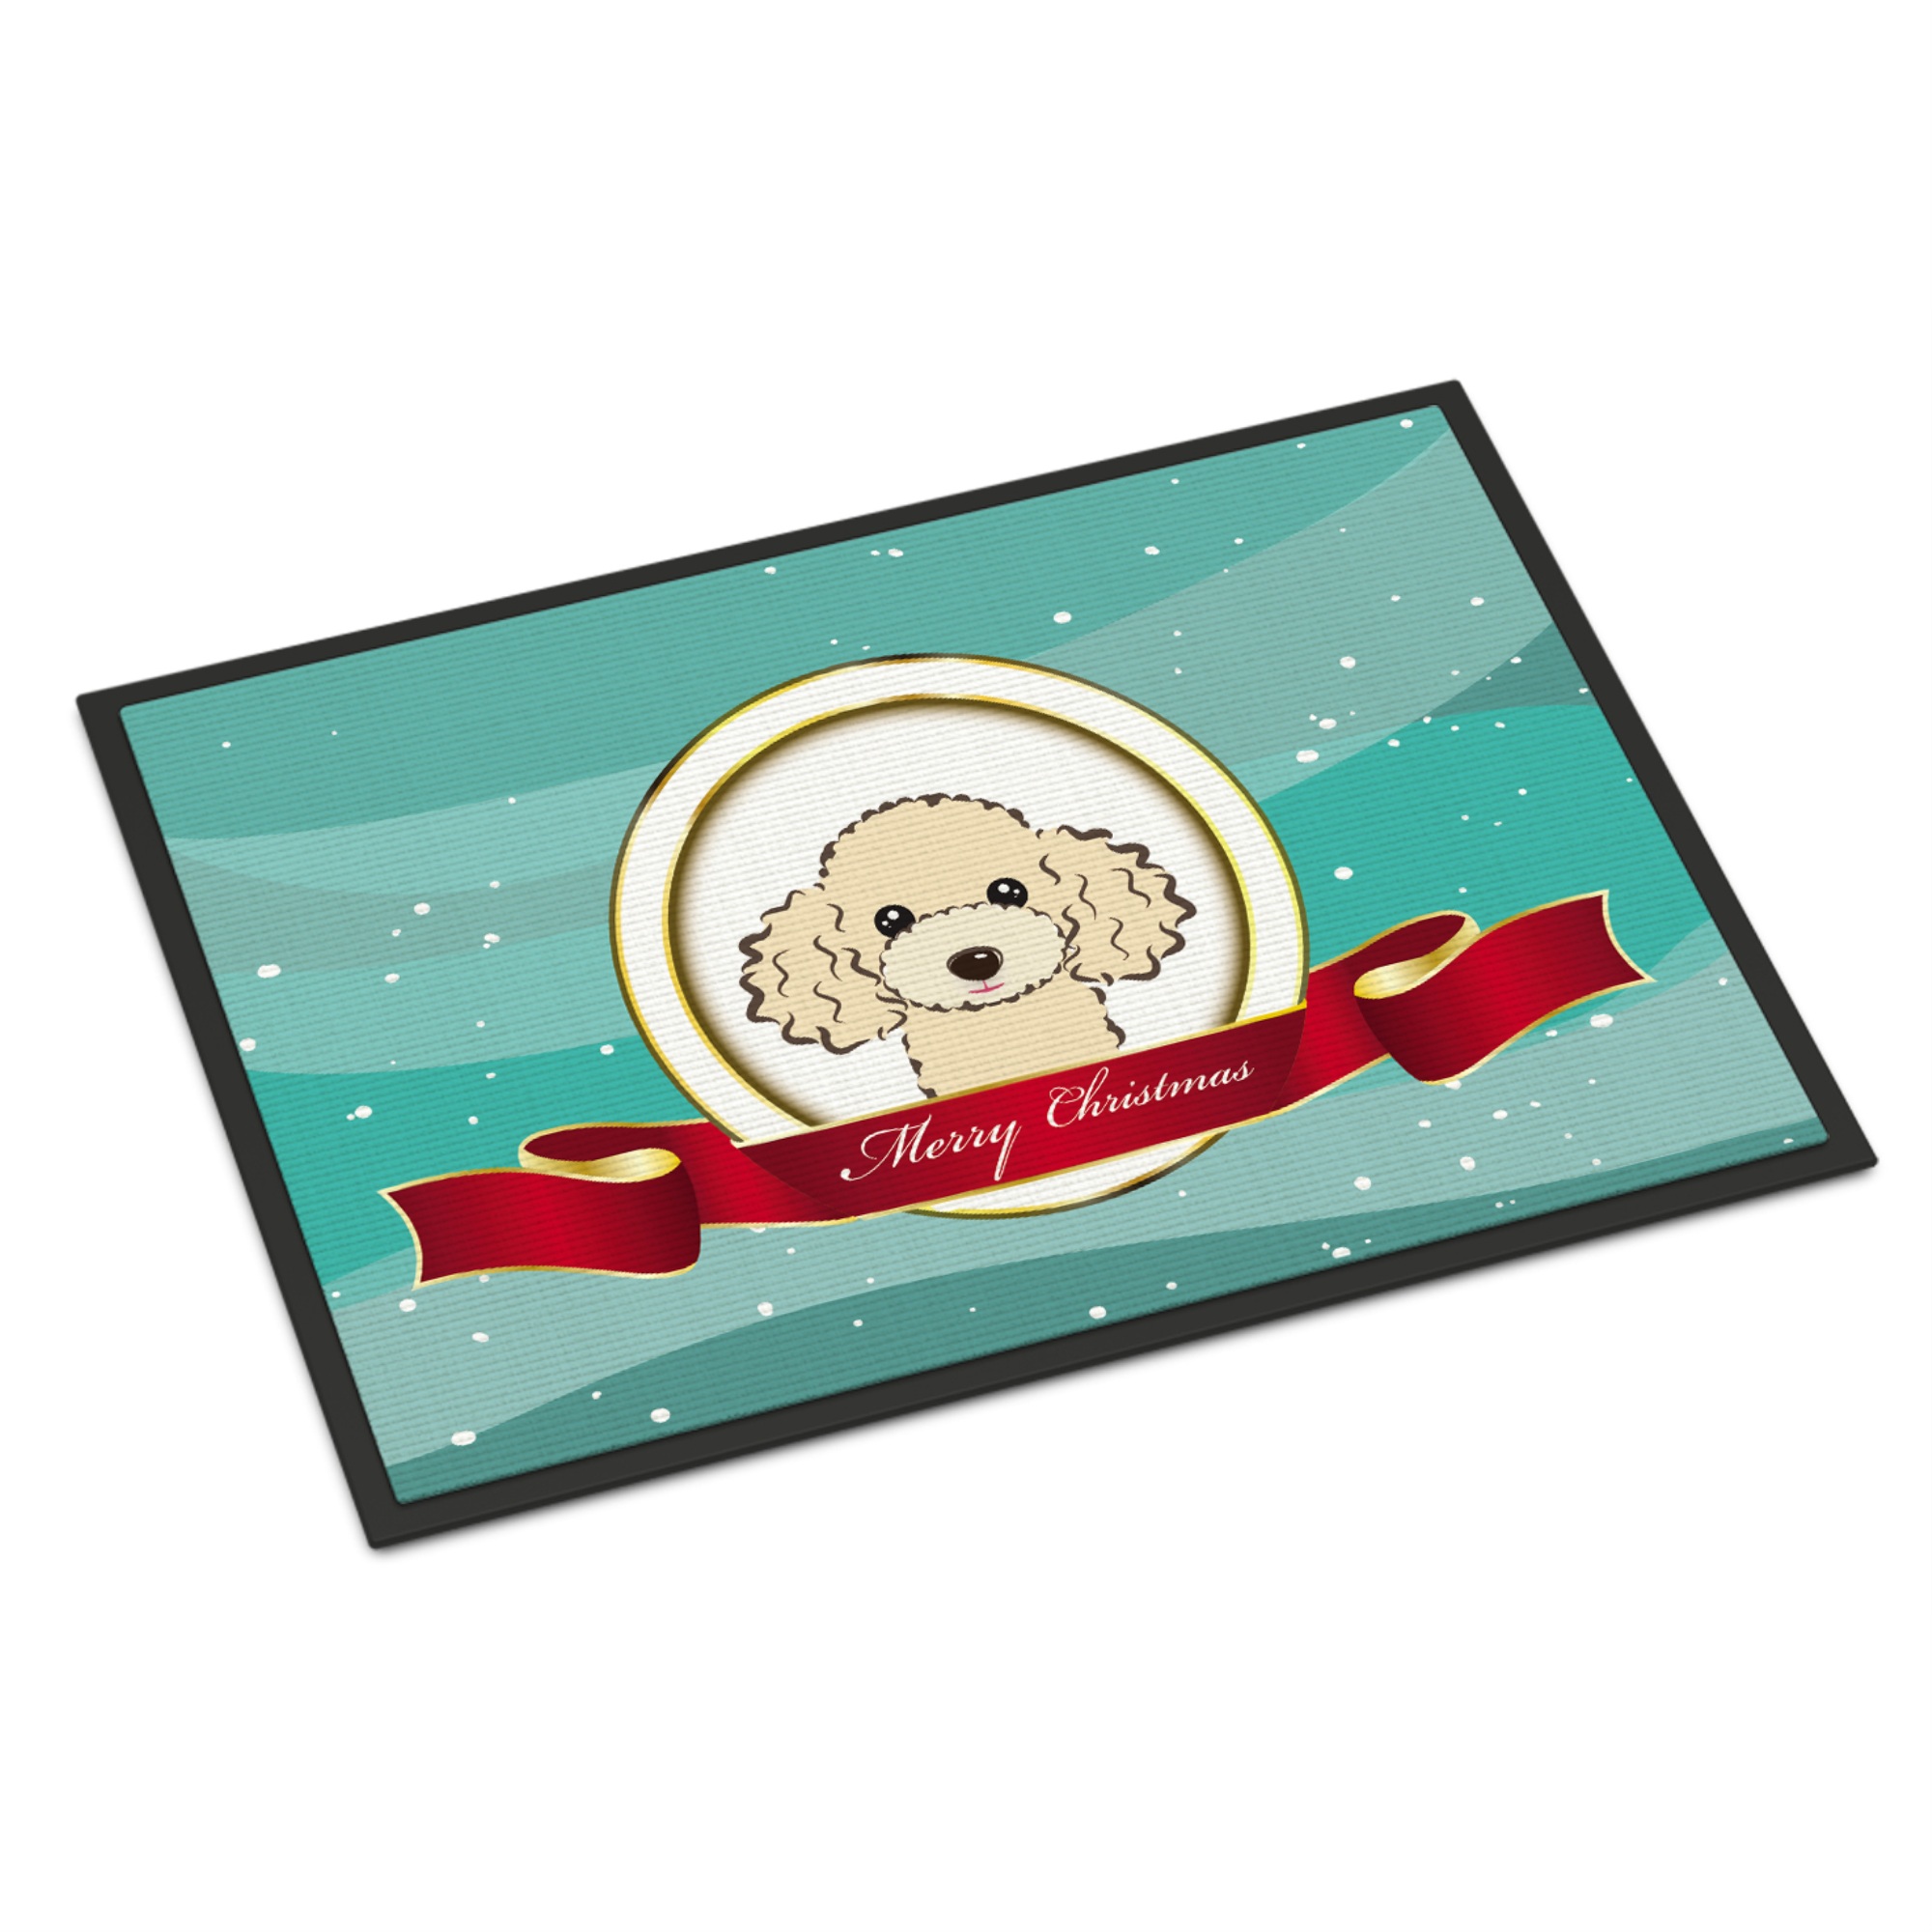 Caroline's Treasures "Caroline's Treasures BB1568JMAT Buff Poodle Merry Christmas Indoor or Outdoor Mat, 24"" x 36"", Multicolor"